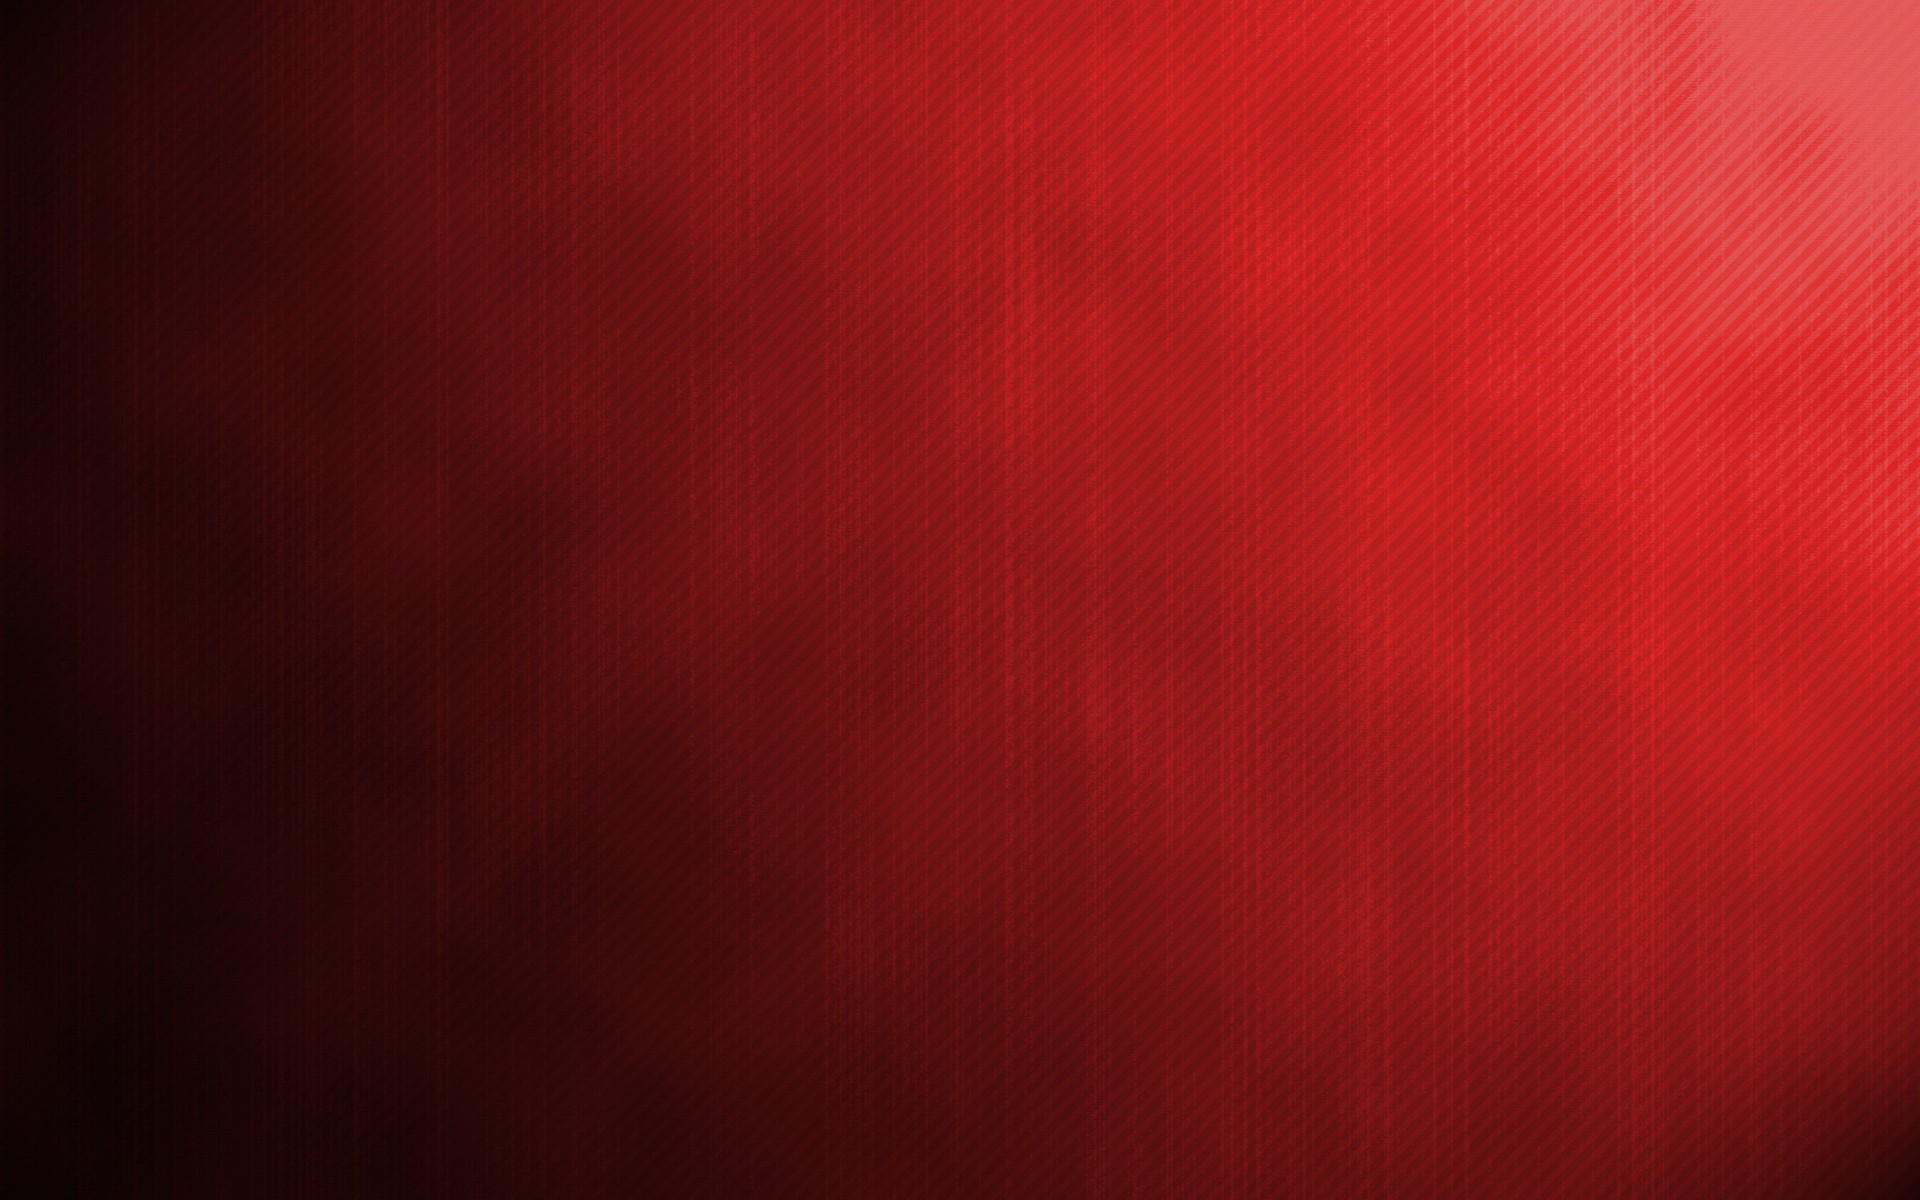  Red  Black  background    Download free beautiful full HD 